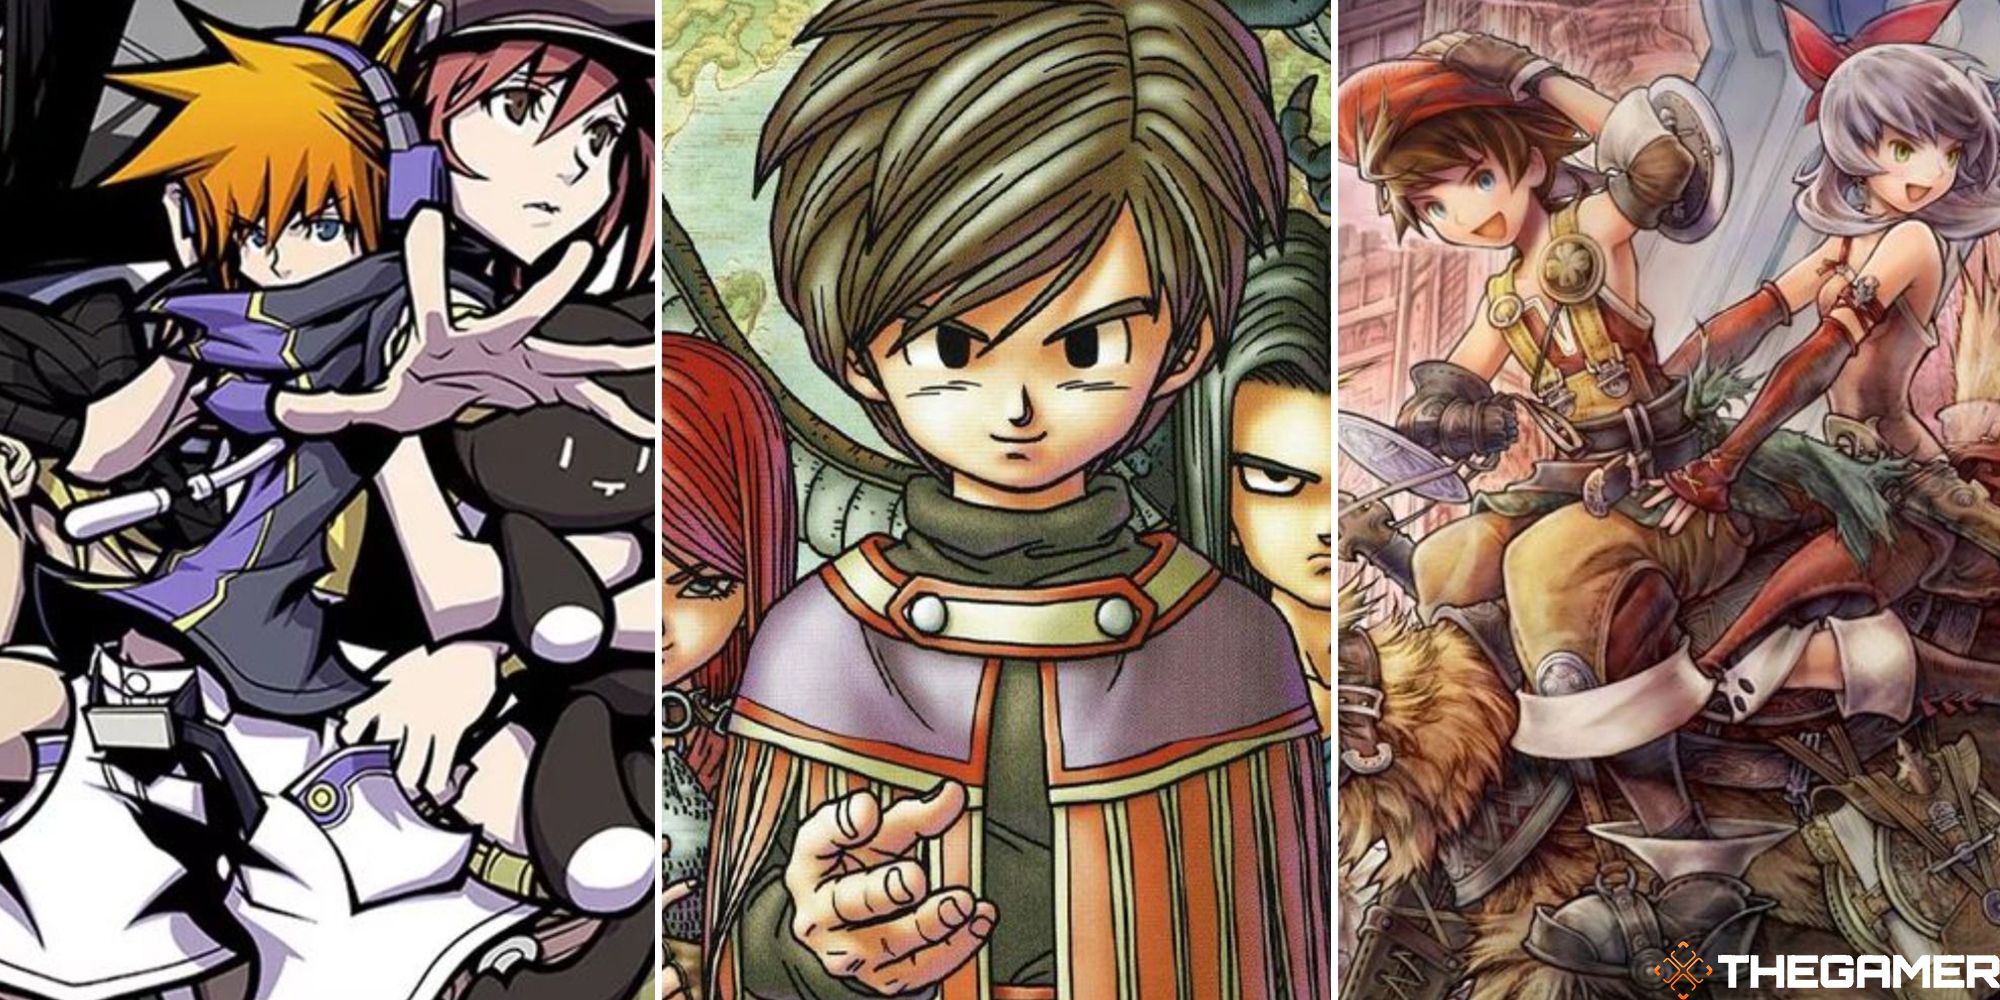 A JRPG based on the Fairy Tail Manga and Anime is coming in 2020 - PowerUp!